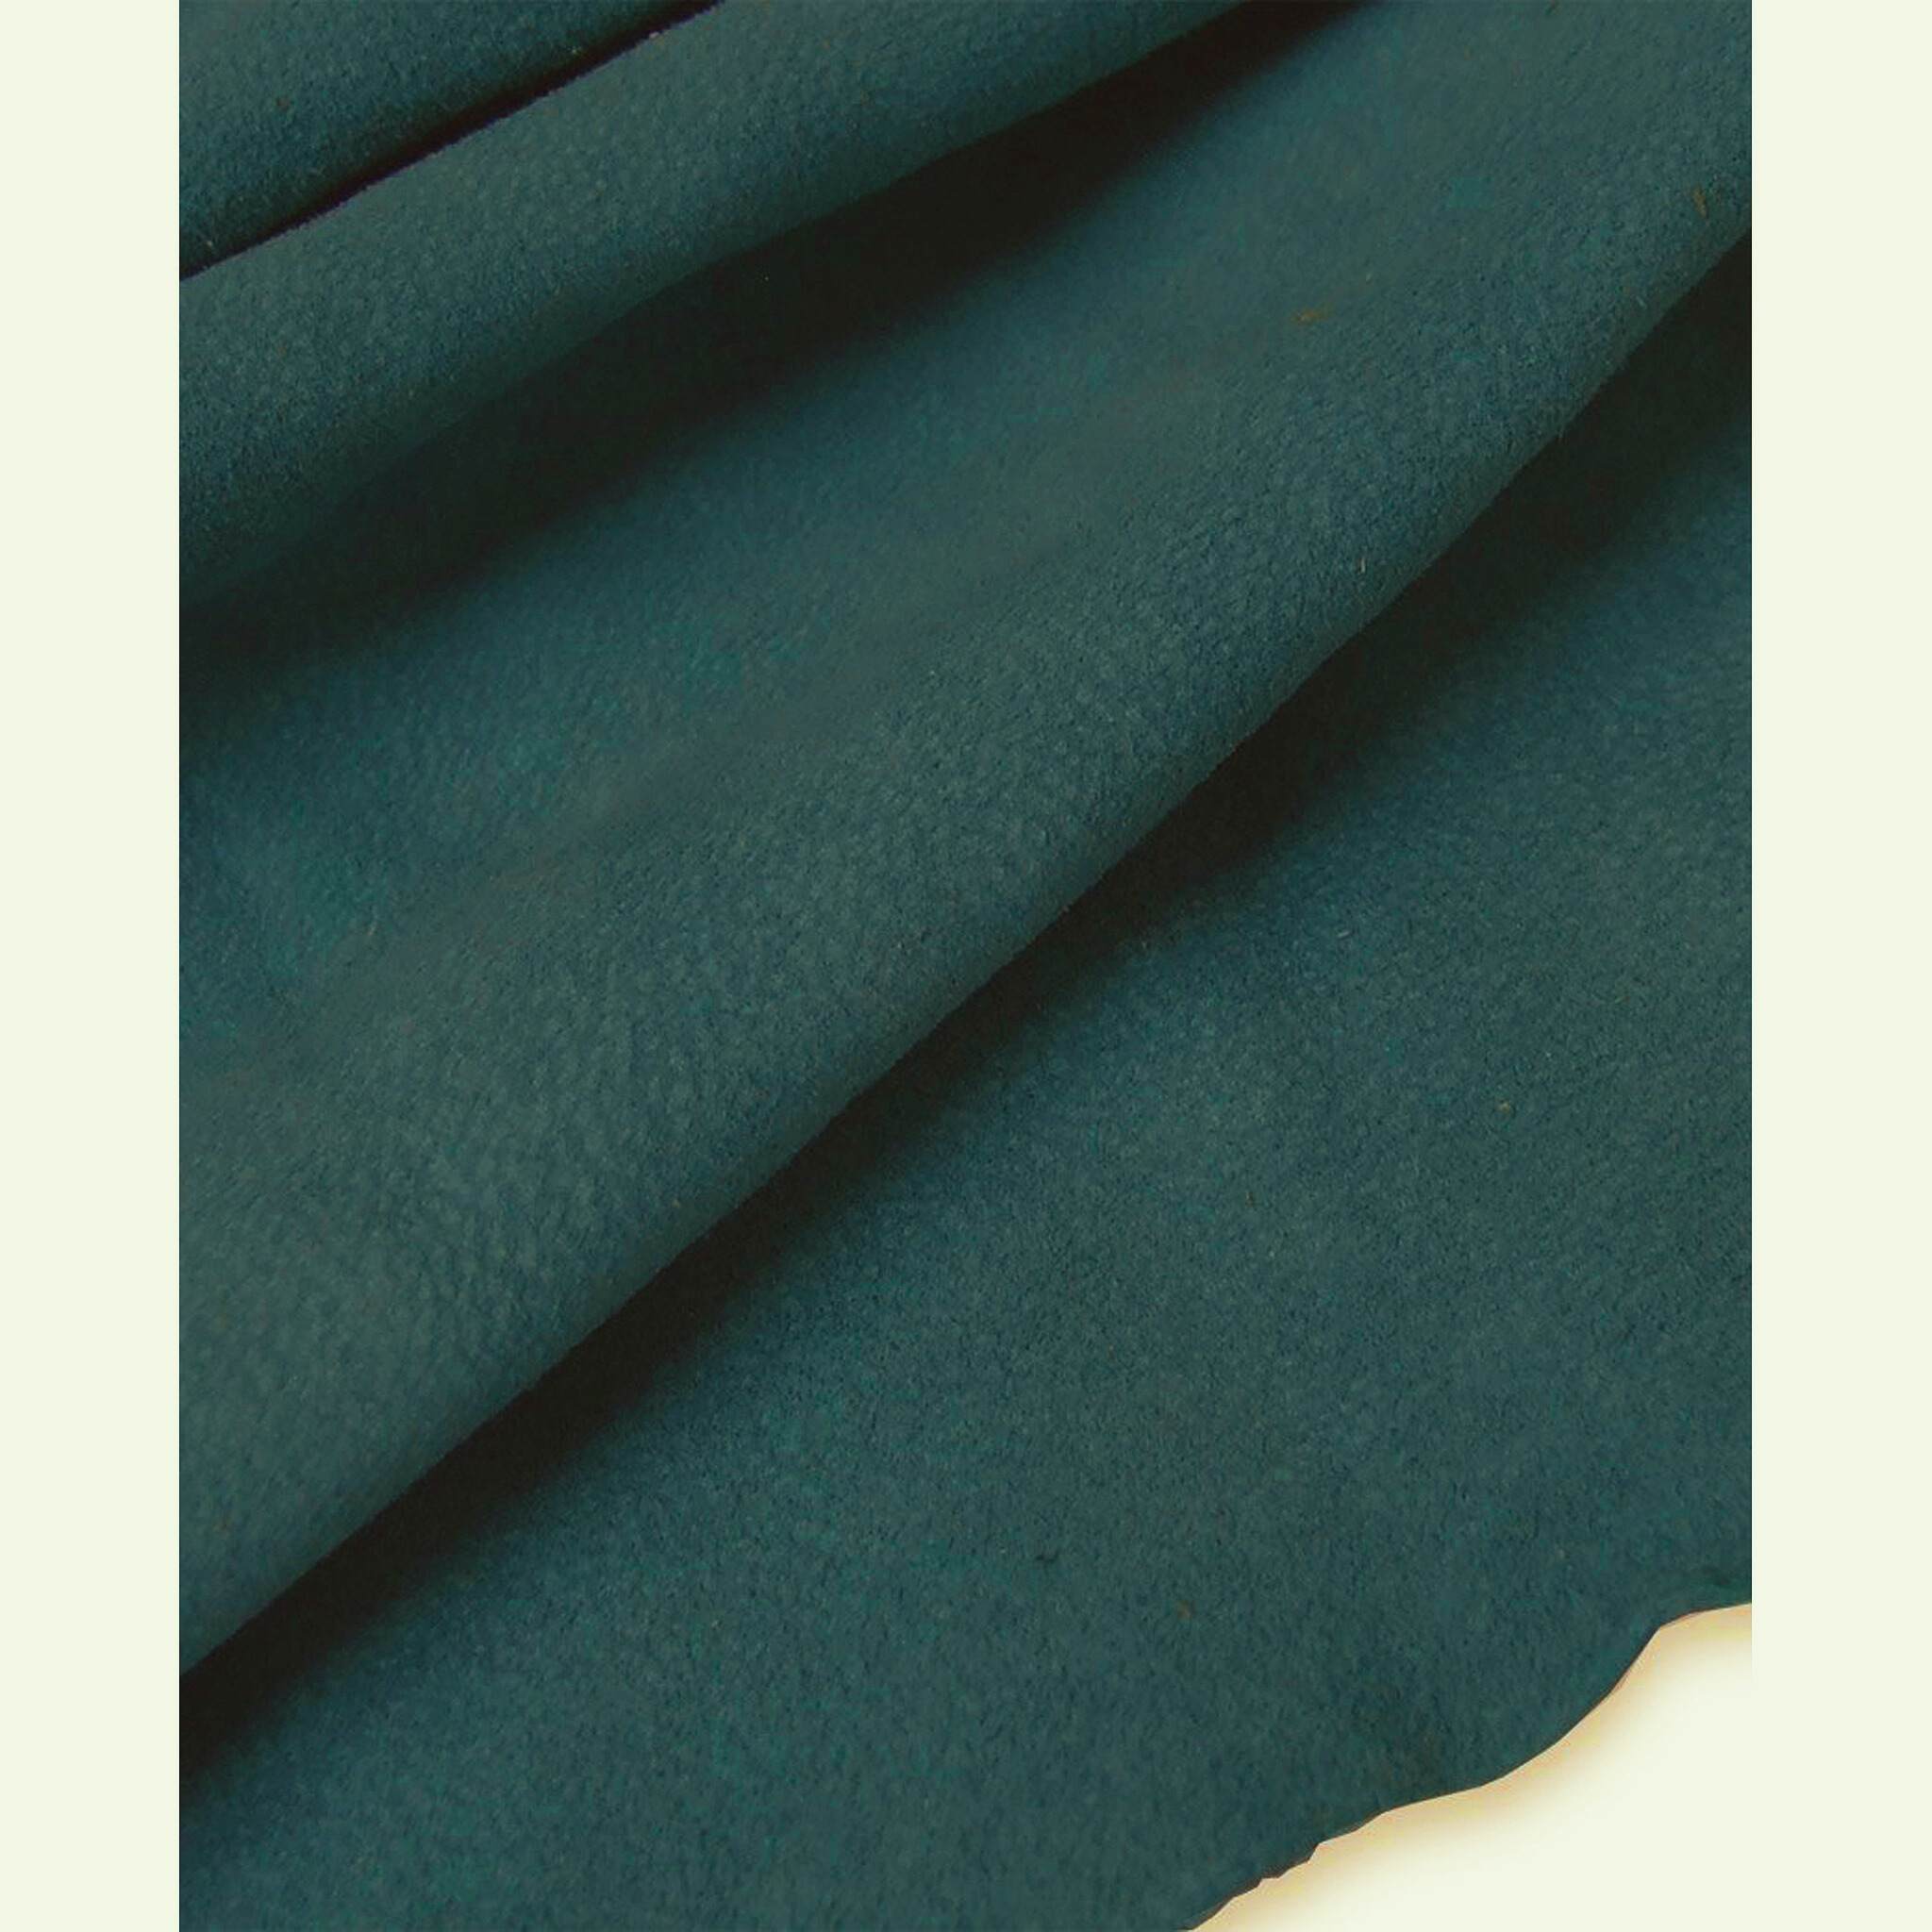 Soft and tactile lightweight suede leather in a muted shade of blue/green teal ideal for garment making, applique, linings